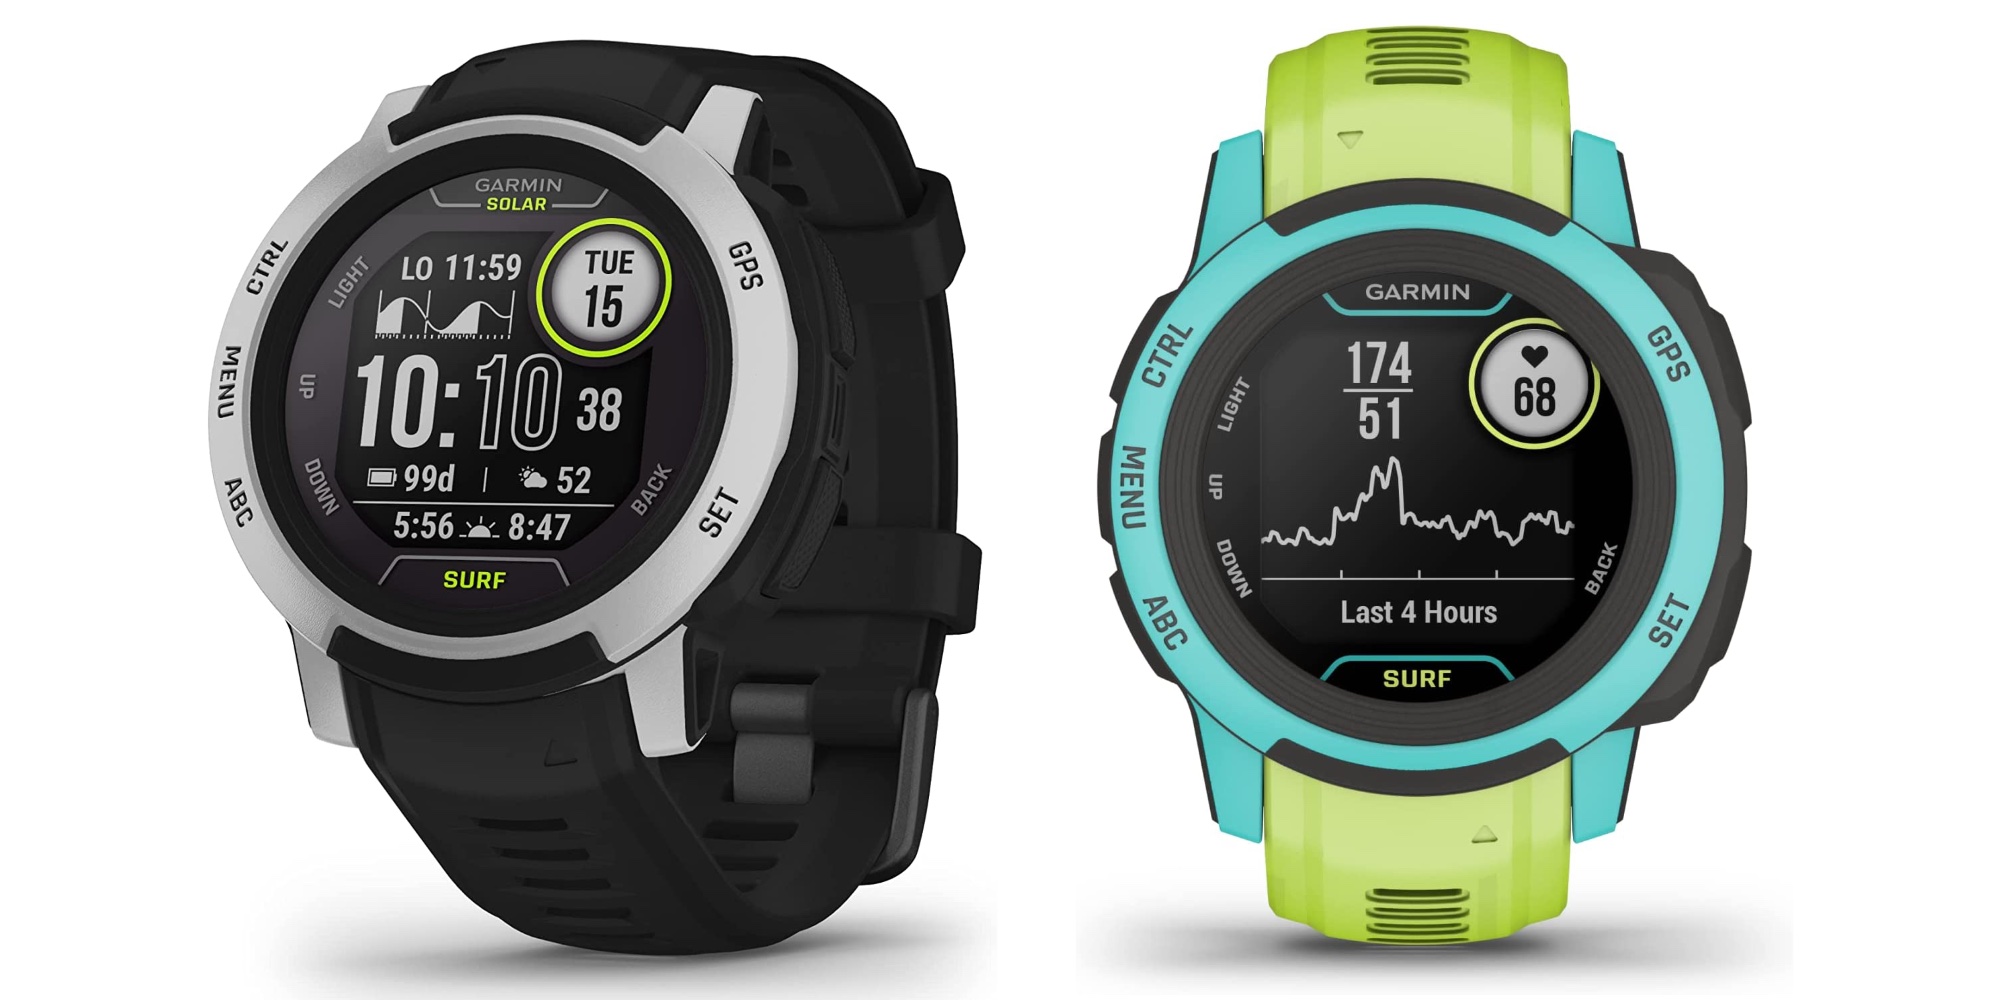 Garmin Instinct S2 Solar smartwatches with indefinite battery life on sale  from $300 ($100 off)